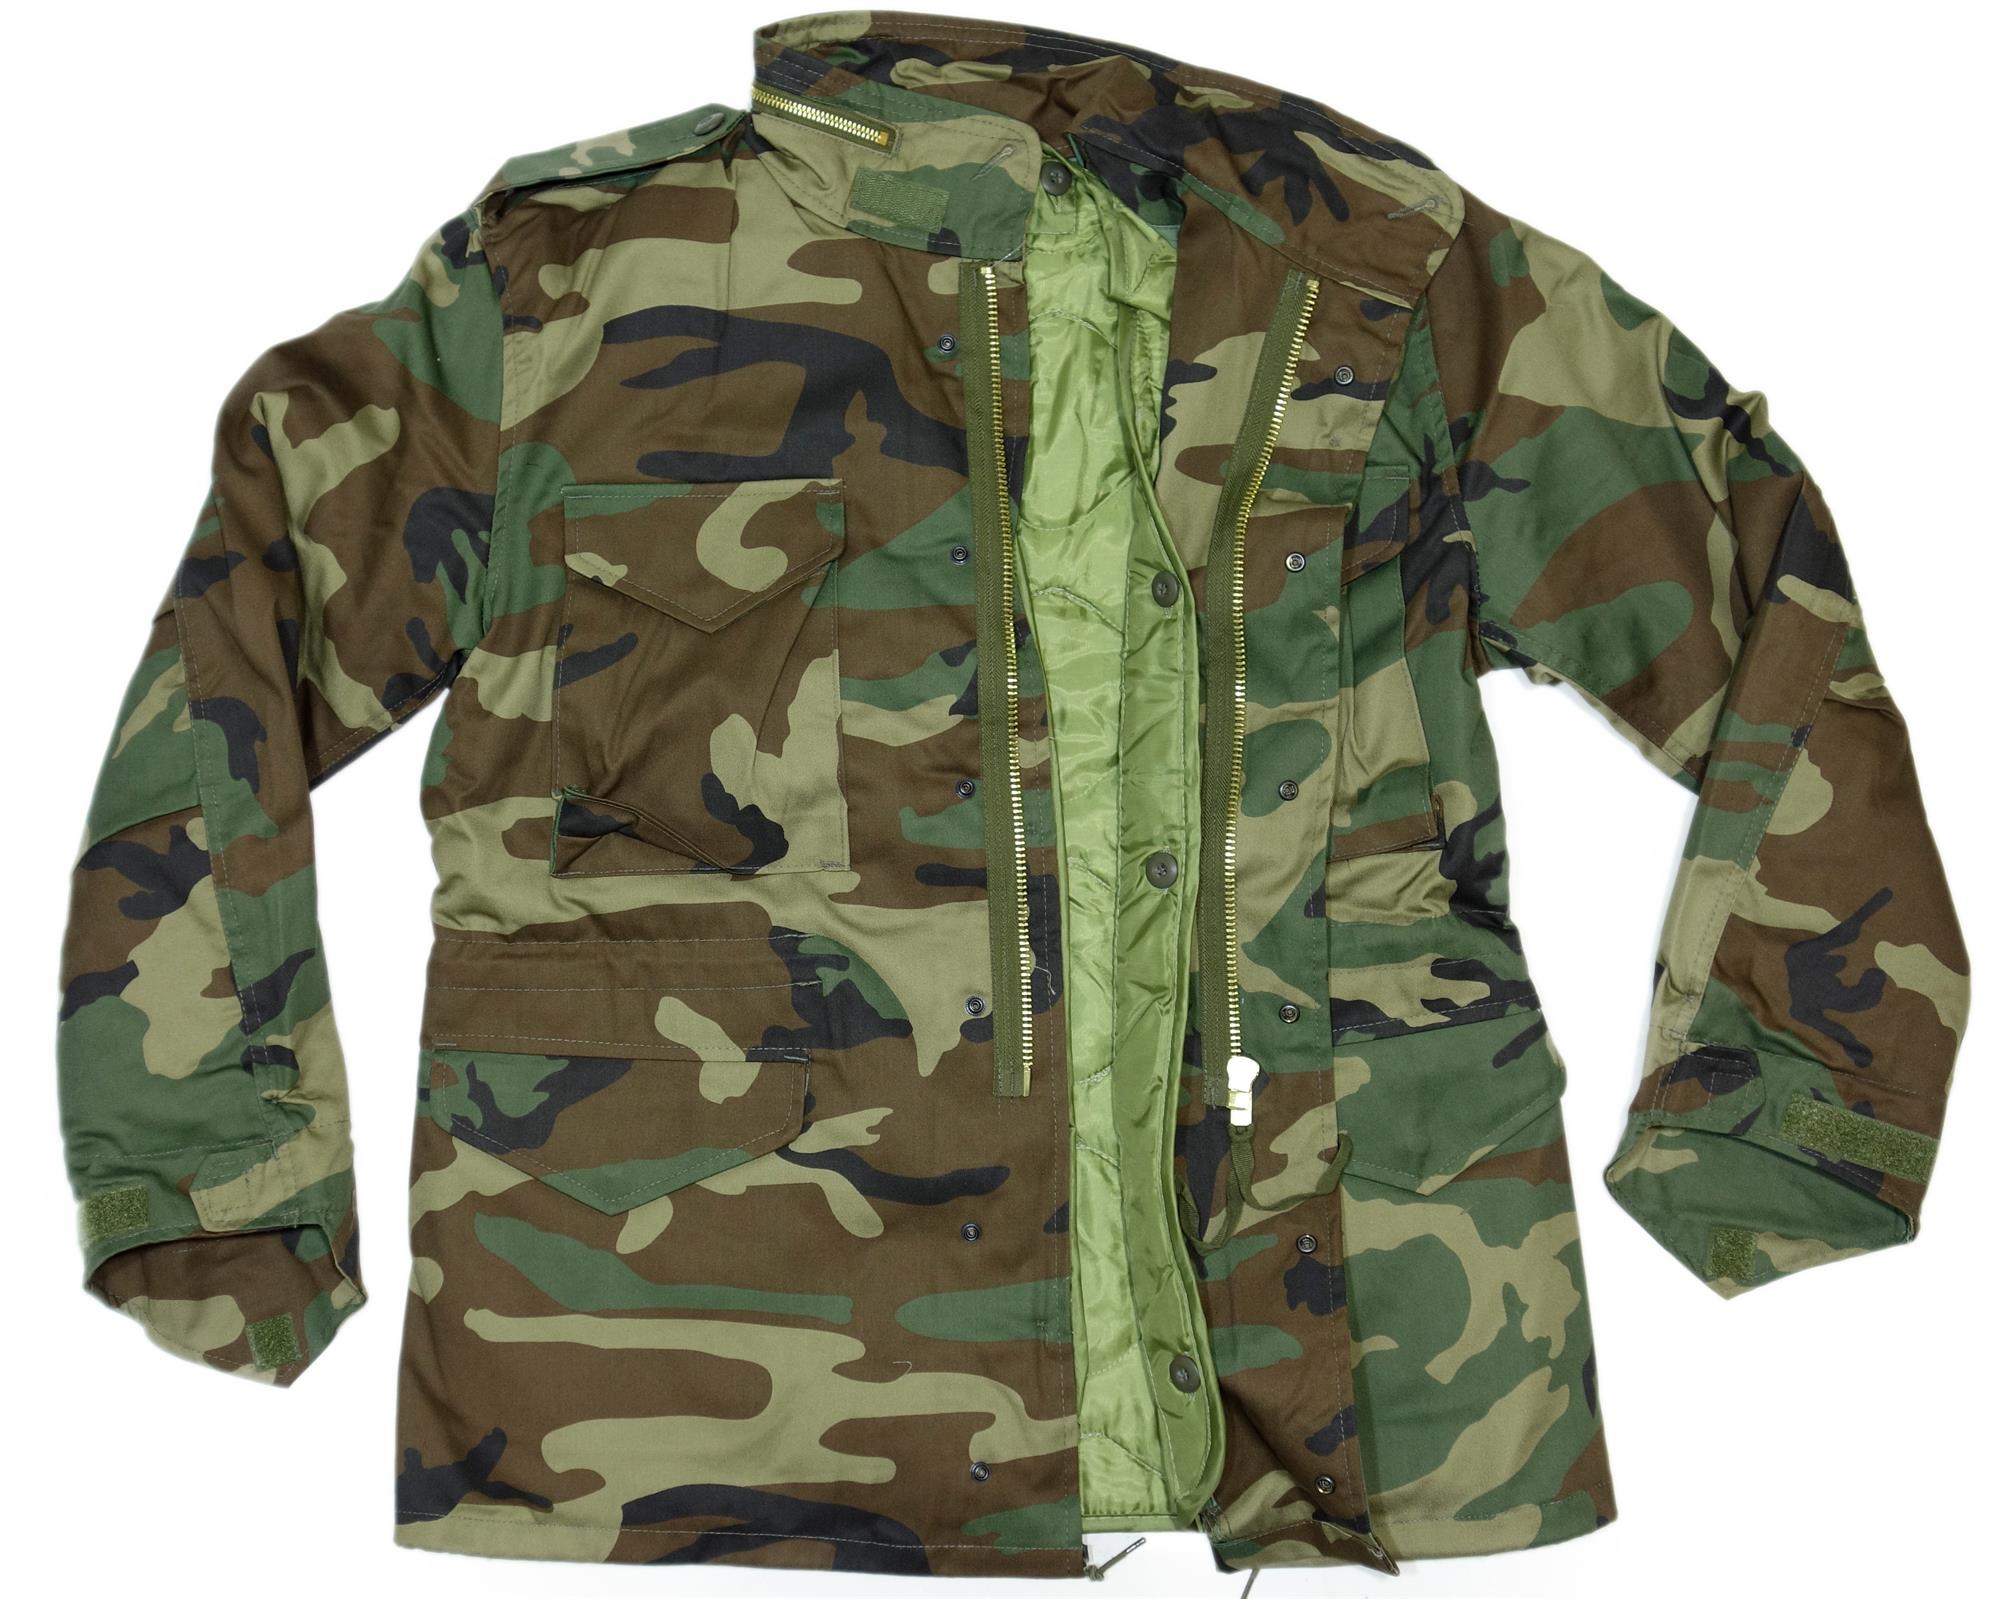 US Army Blouse Coat Cold Weather Woodland Camouflage Combat - 3